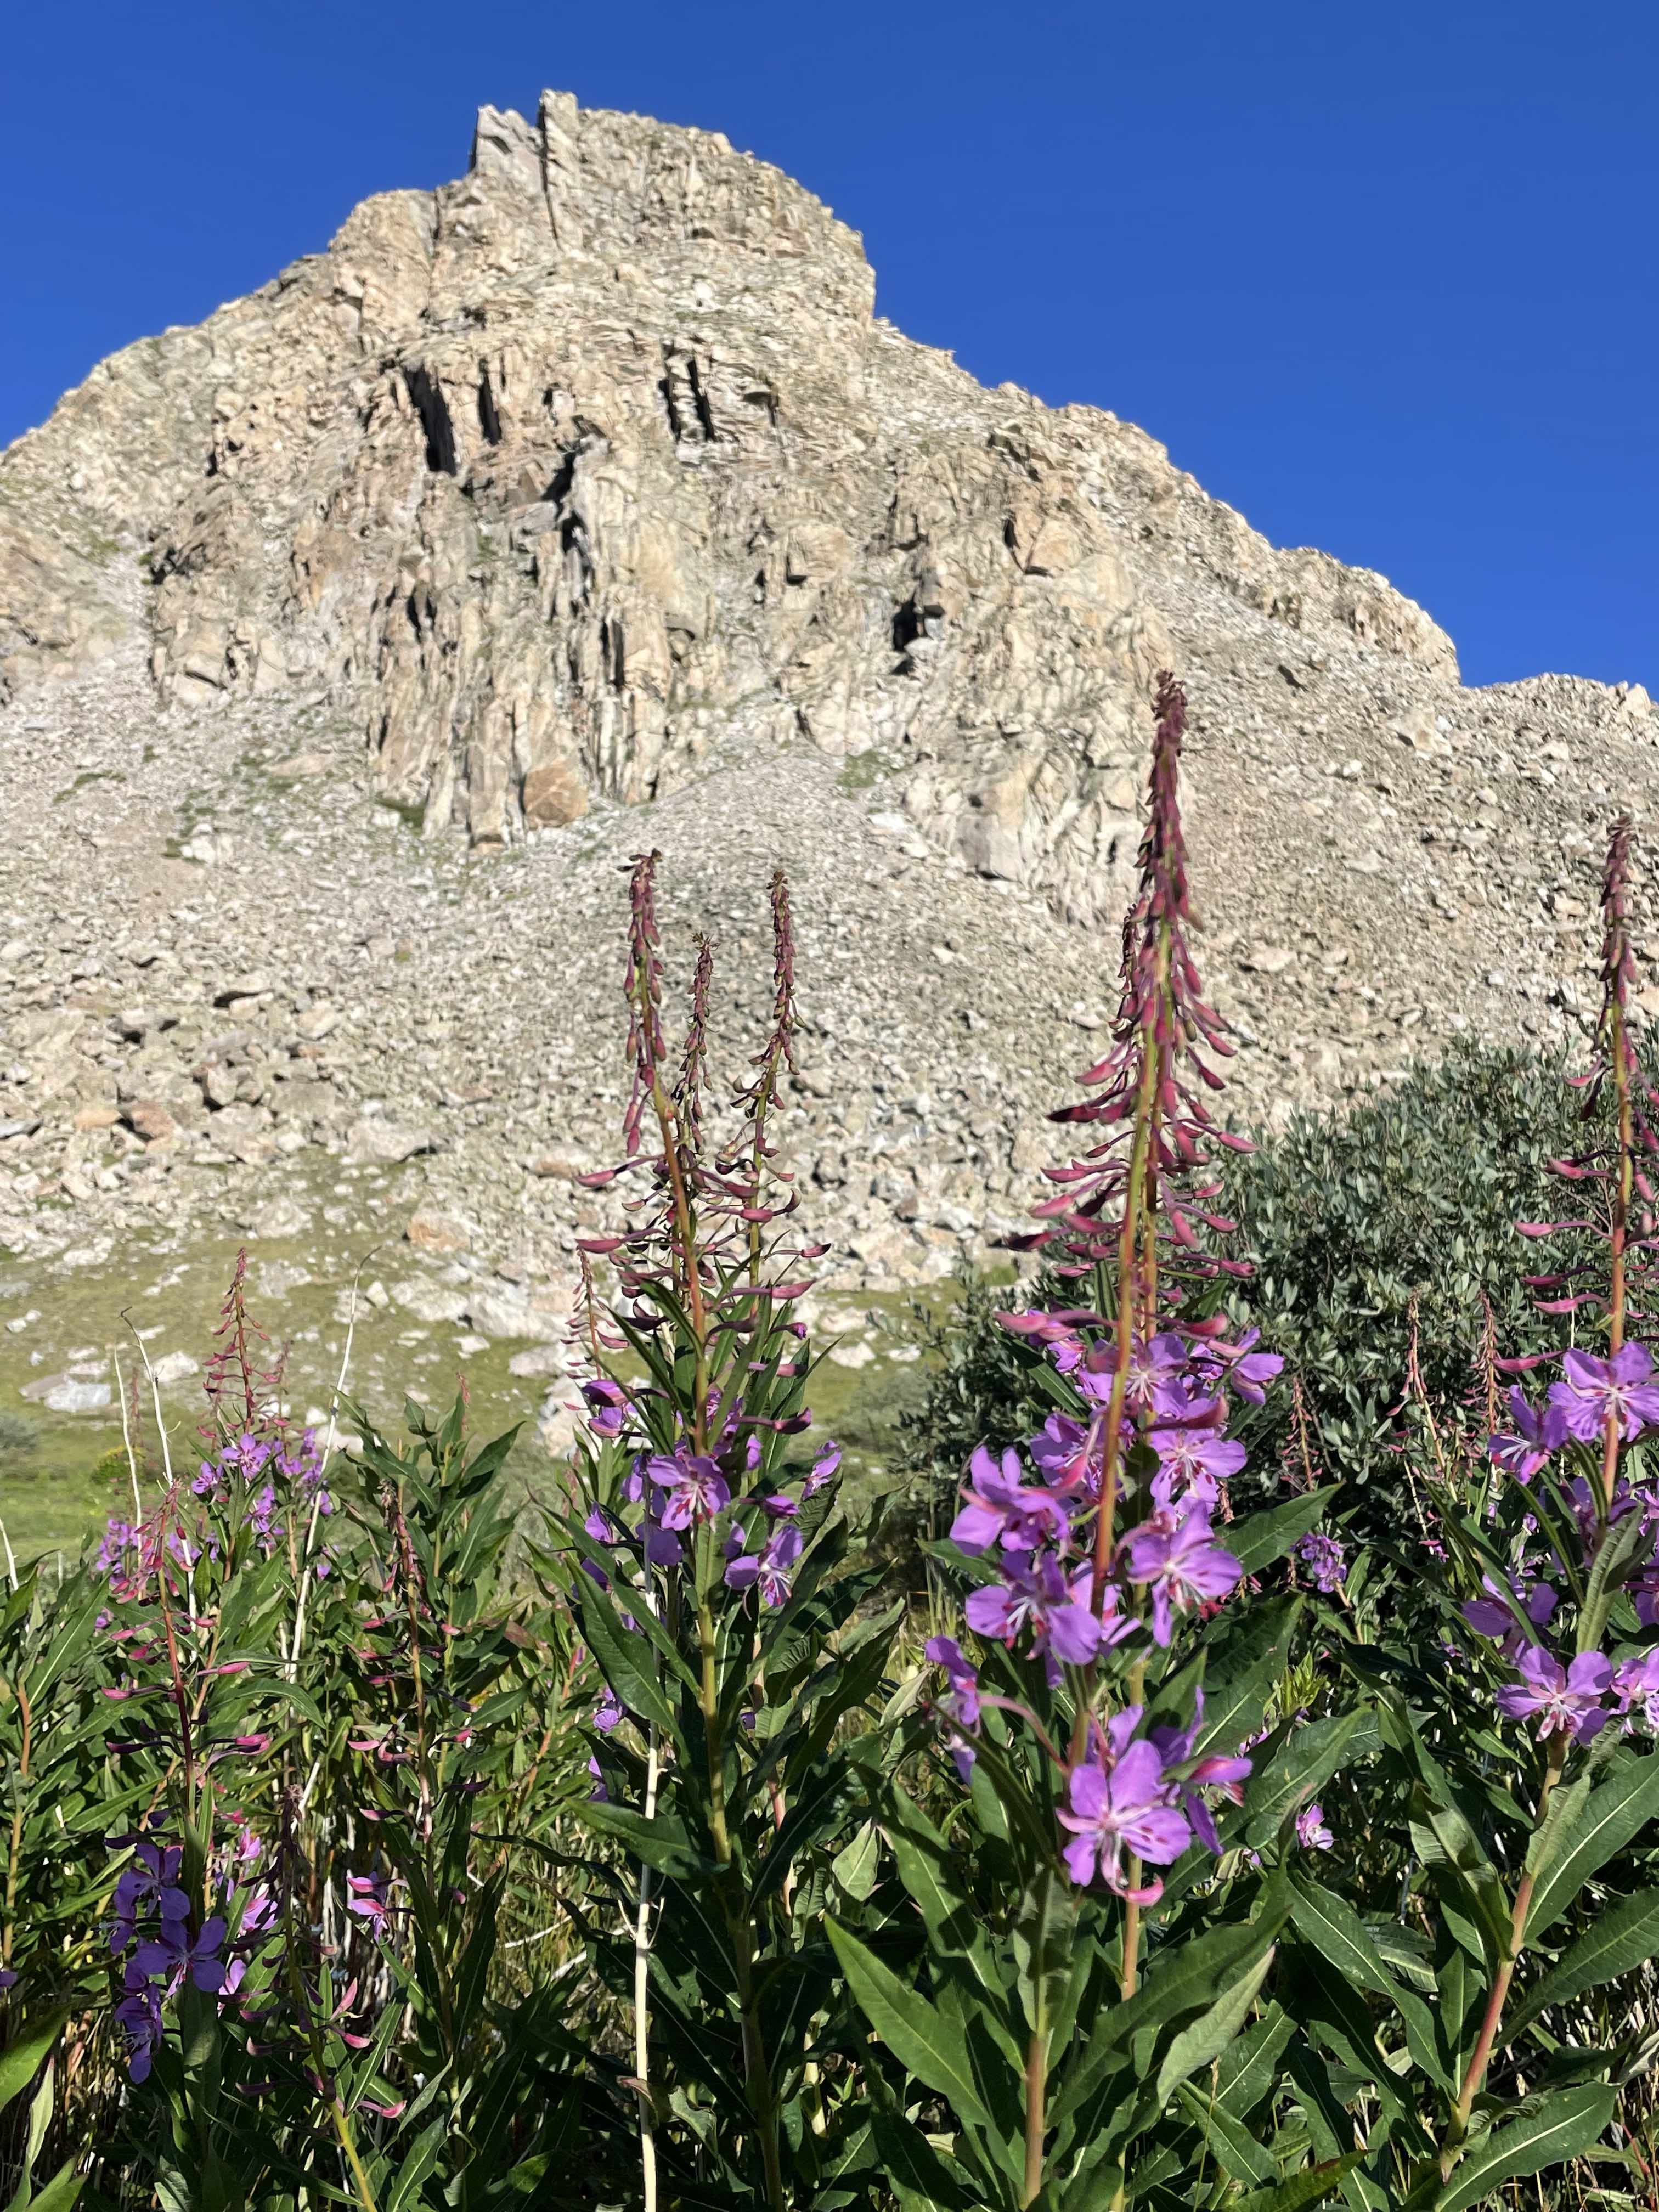 Flower in front of mountain with a rocky 